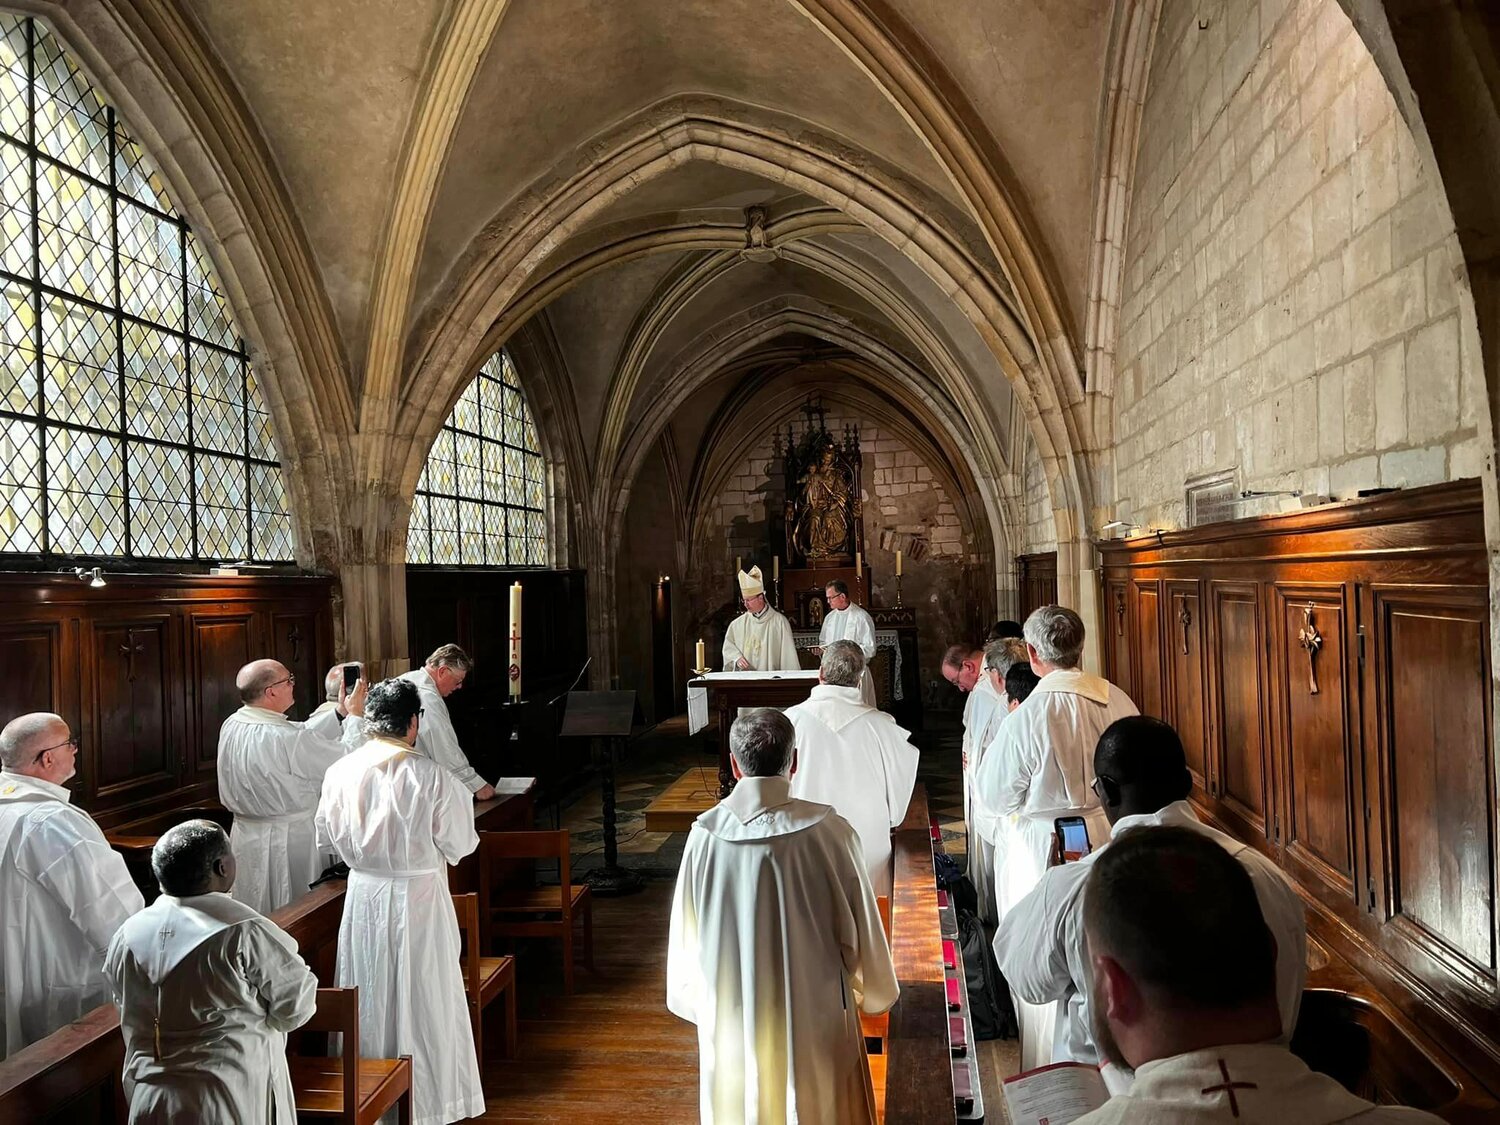 Twenty priests of the Jefferson City diocese gather for Mass with Bishop W. Shawn McKnight April 15 in the chapel of “La Providence,” the place they were staying during their pilgrimage and retreat in Ars-sur-Formans, France.